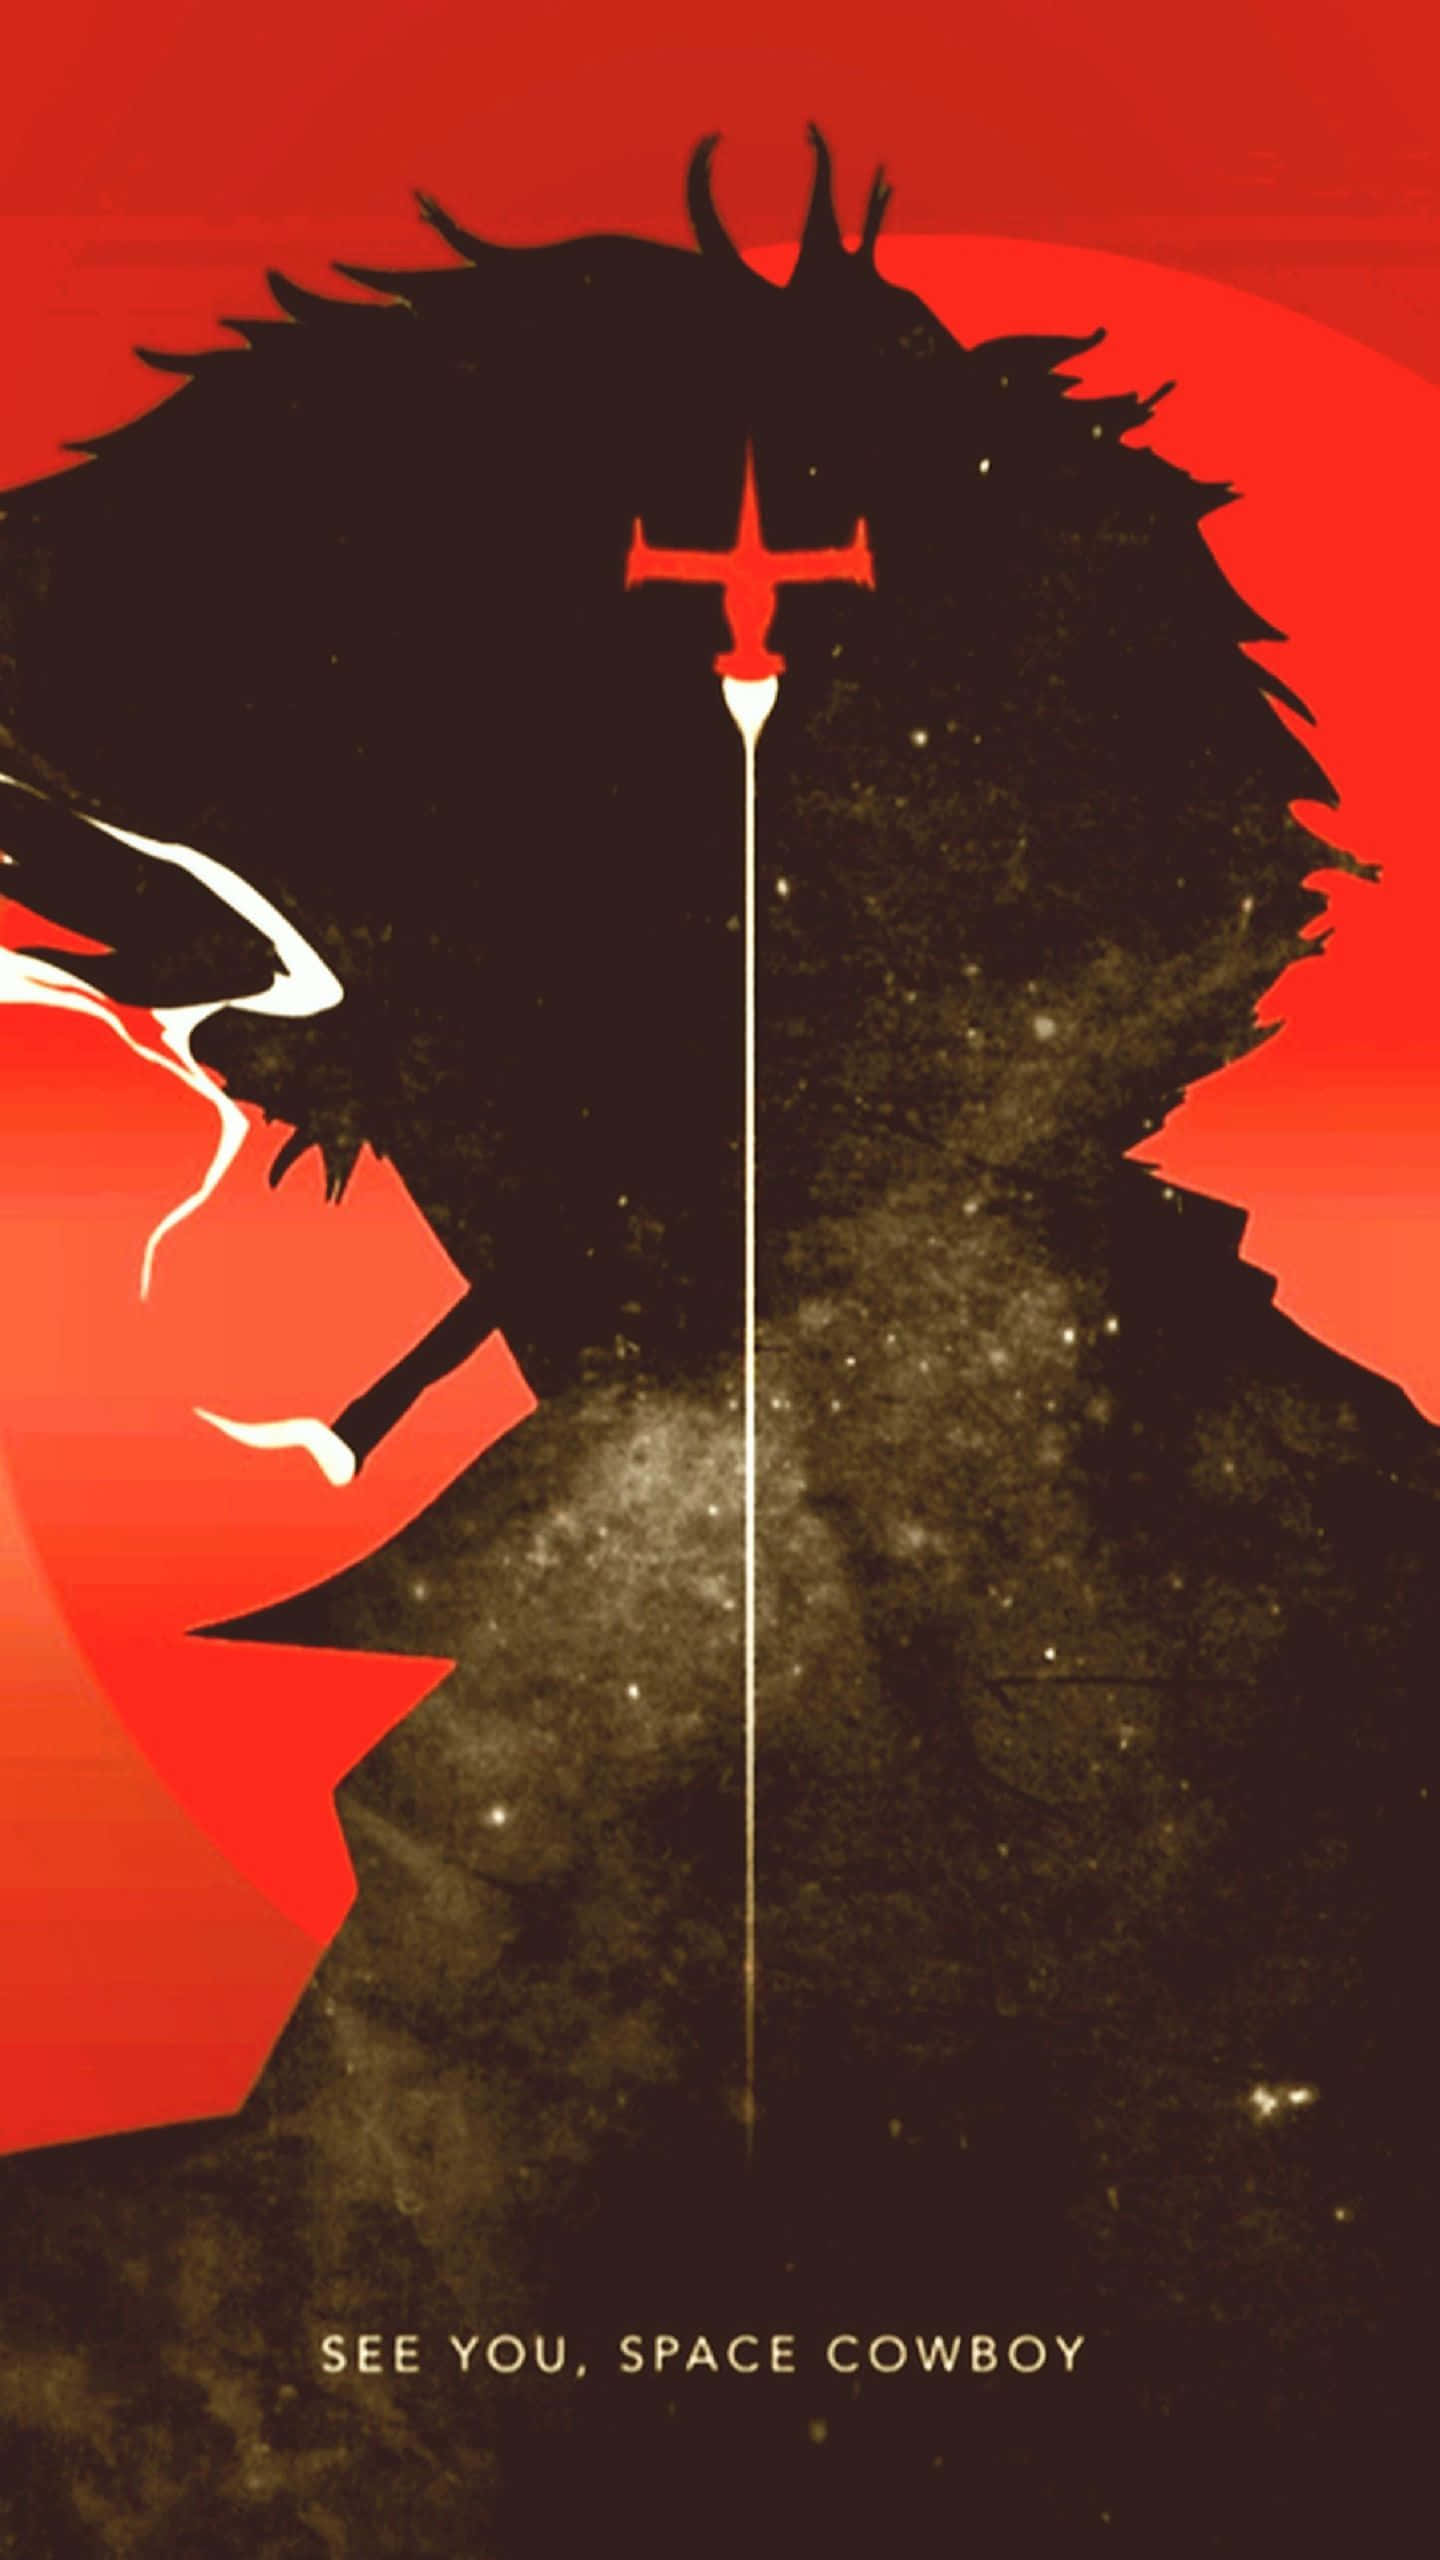 "Live Fast and Take Risks with the Cowboy Bebop Iphone" Wallpaper